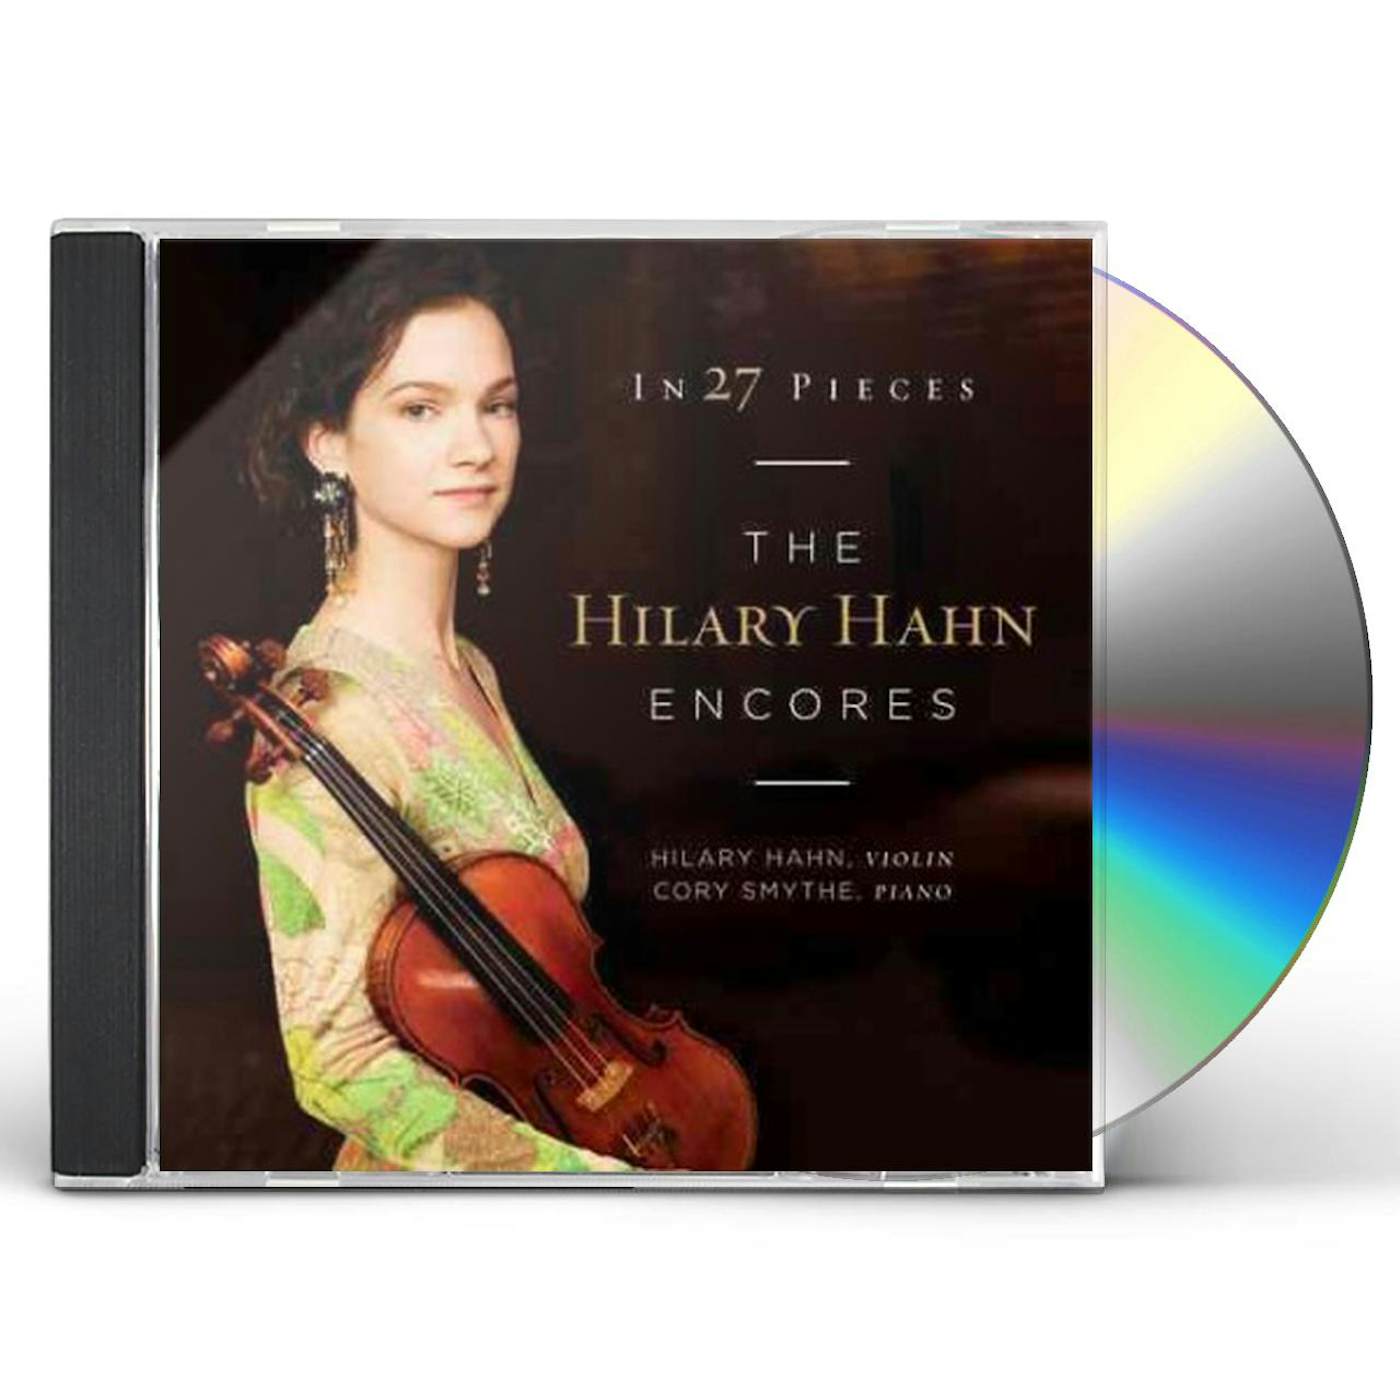 IN 27 PIECES: THE HILARY HAHN ENCORES CD